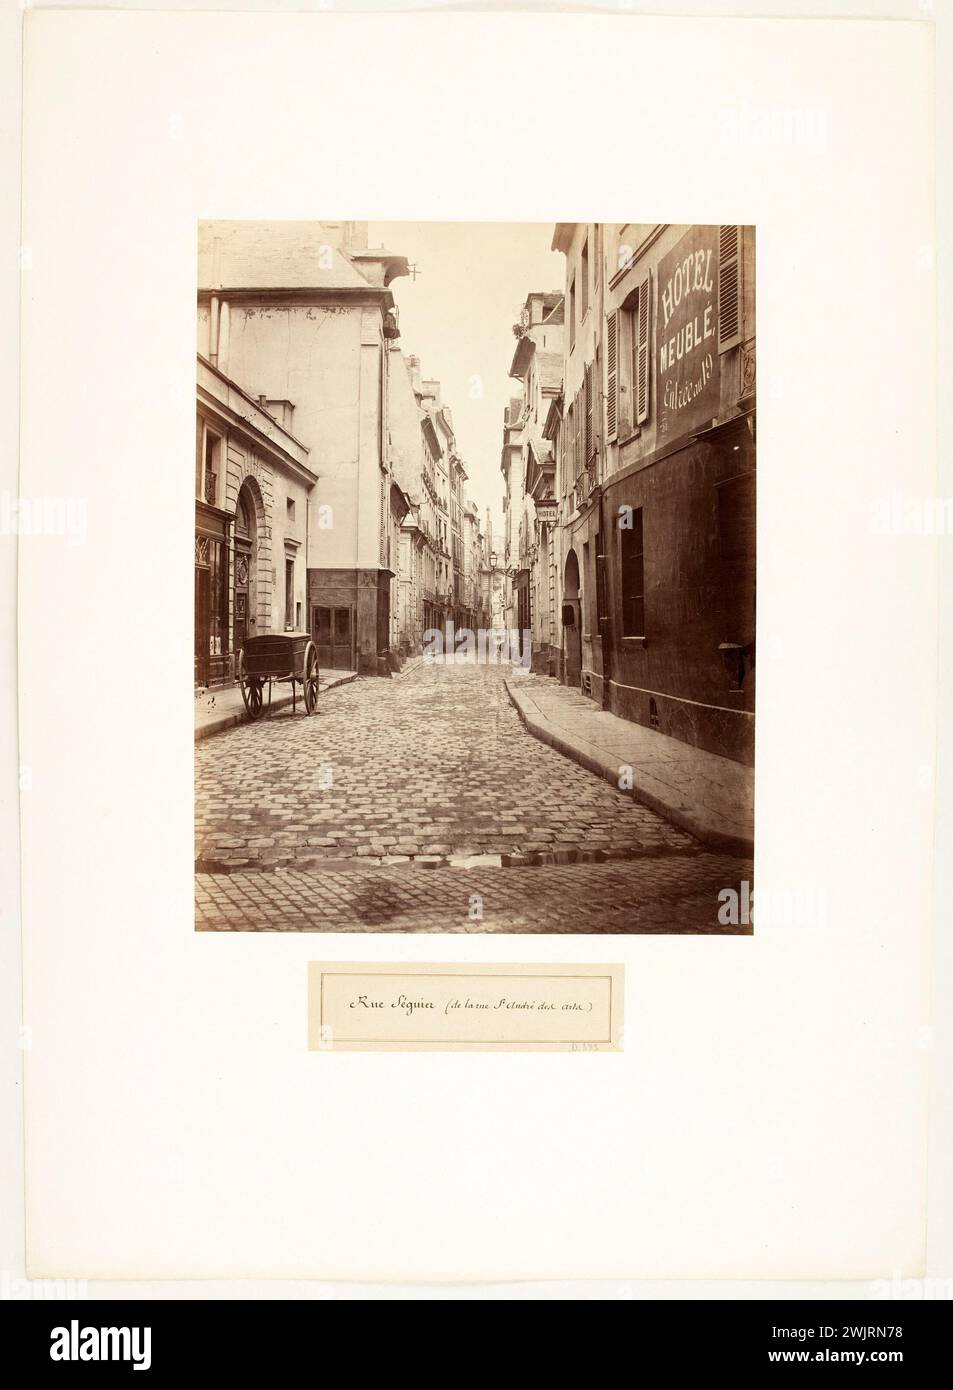 Rue Séguier, View of rue Saint-André-des-Arts. Paris (6th arr.), Between 1865 and 1868. Photograph by Charles Marville (1813-1879). Paris, Carnavalet museum. 146116-14 CARRIOLE, Facade Immeuble, Hotel Meuble, Quartier Currency, rue Pavee, rue Seguier, view of Saint-Andre-des-Arts, 19th 19th 19th 19th 19th century Stock Photo